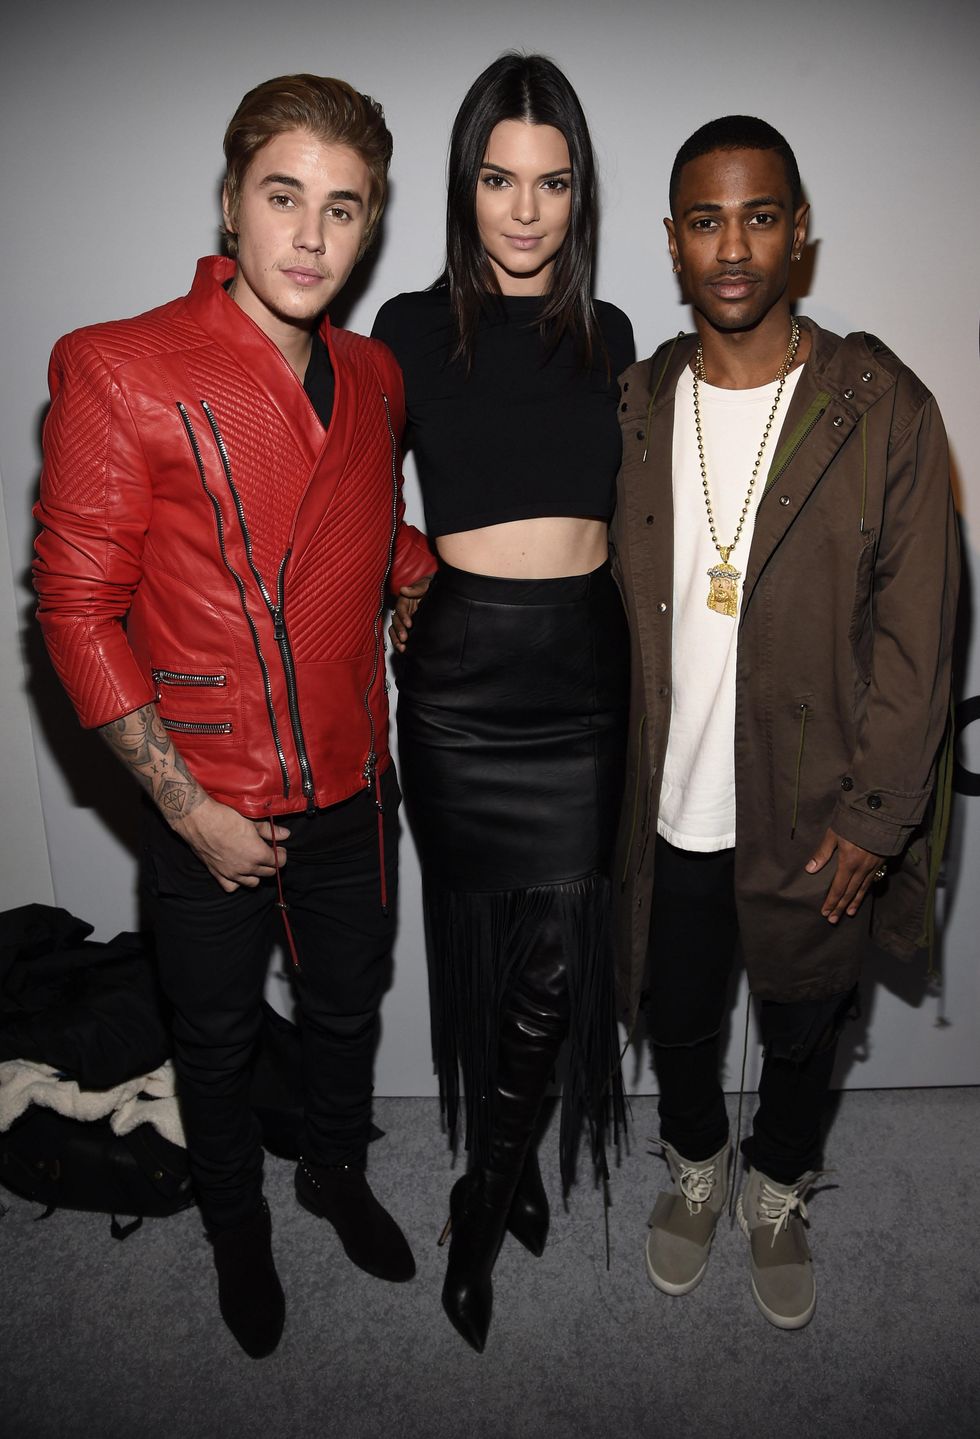 Justin Bieber, Kendall Jenner, and Big Sean pose backstage at the adidas Originals x Kanye West YEEZY SEASON 1 fashion show